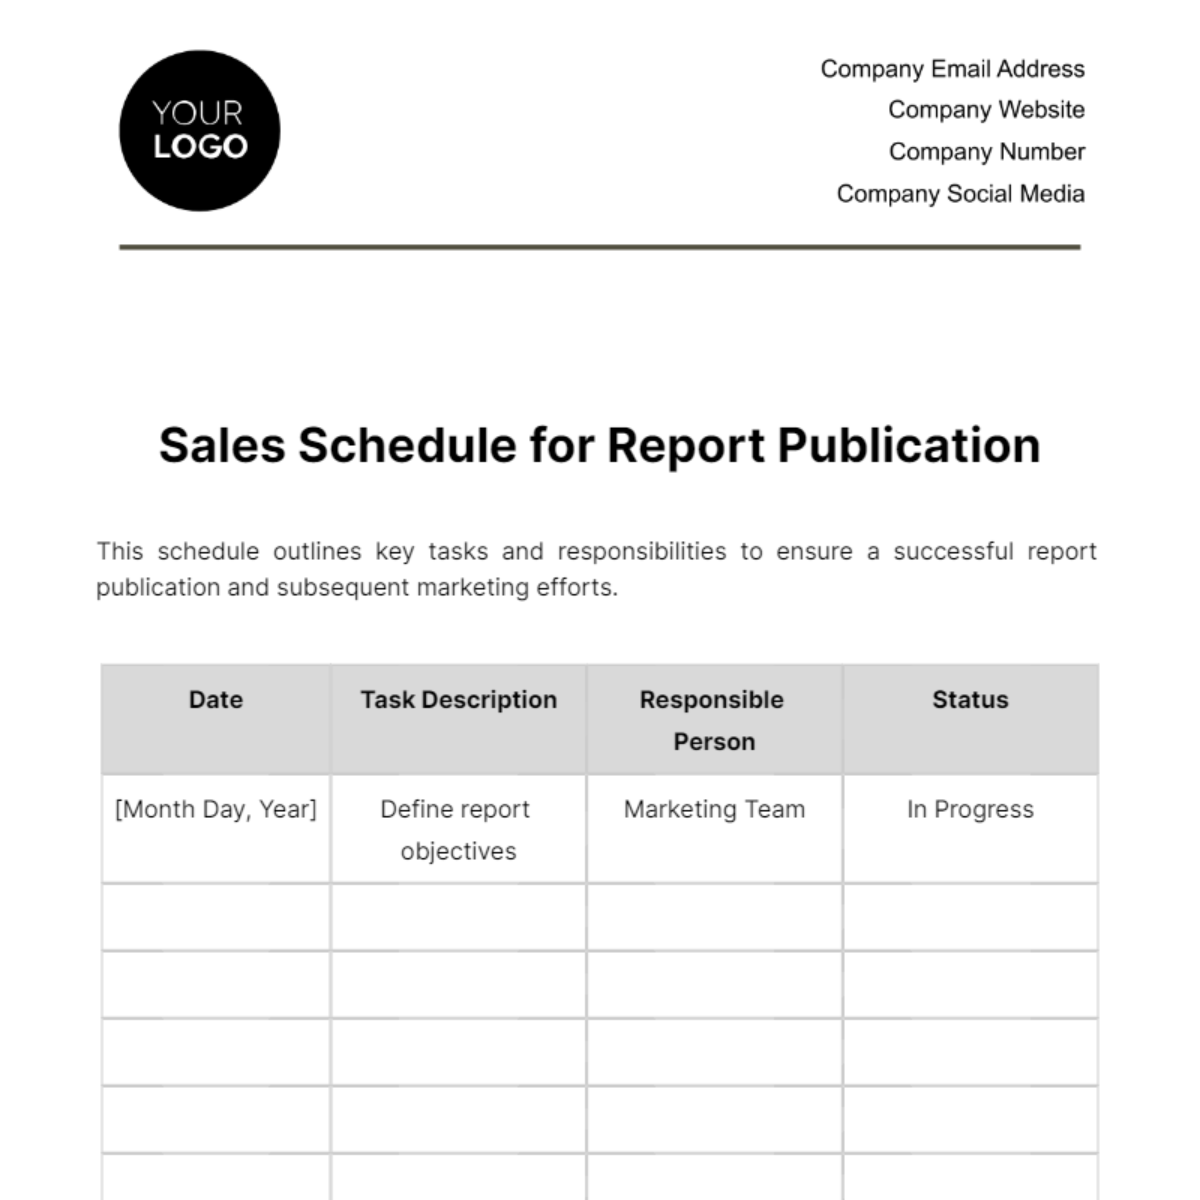 Free Sales Schedule for Report Publication Template